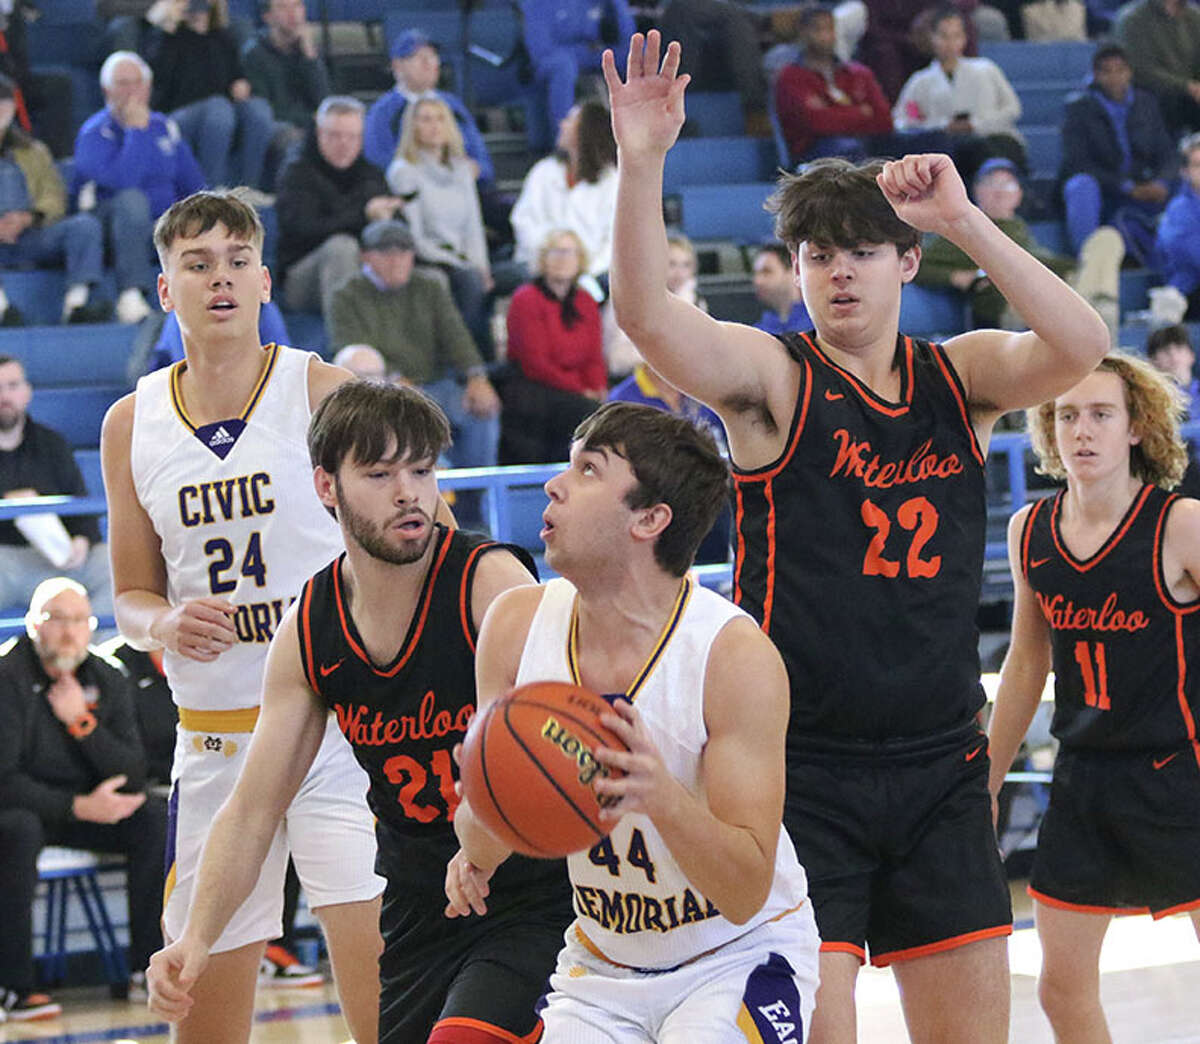 CM's Dalton Buhs (44) looks to shoot while Waterloo's Wyatt Fink (21) and Alex Stell (22) defend in the lane Tuesday at the Freeburg-Columbia Holiday Tournament in Freeburg. CM's Sam Buckley (left) and Waterloo's Isaac Lohman (right) watch the play.